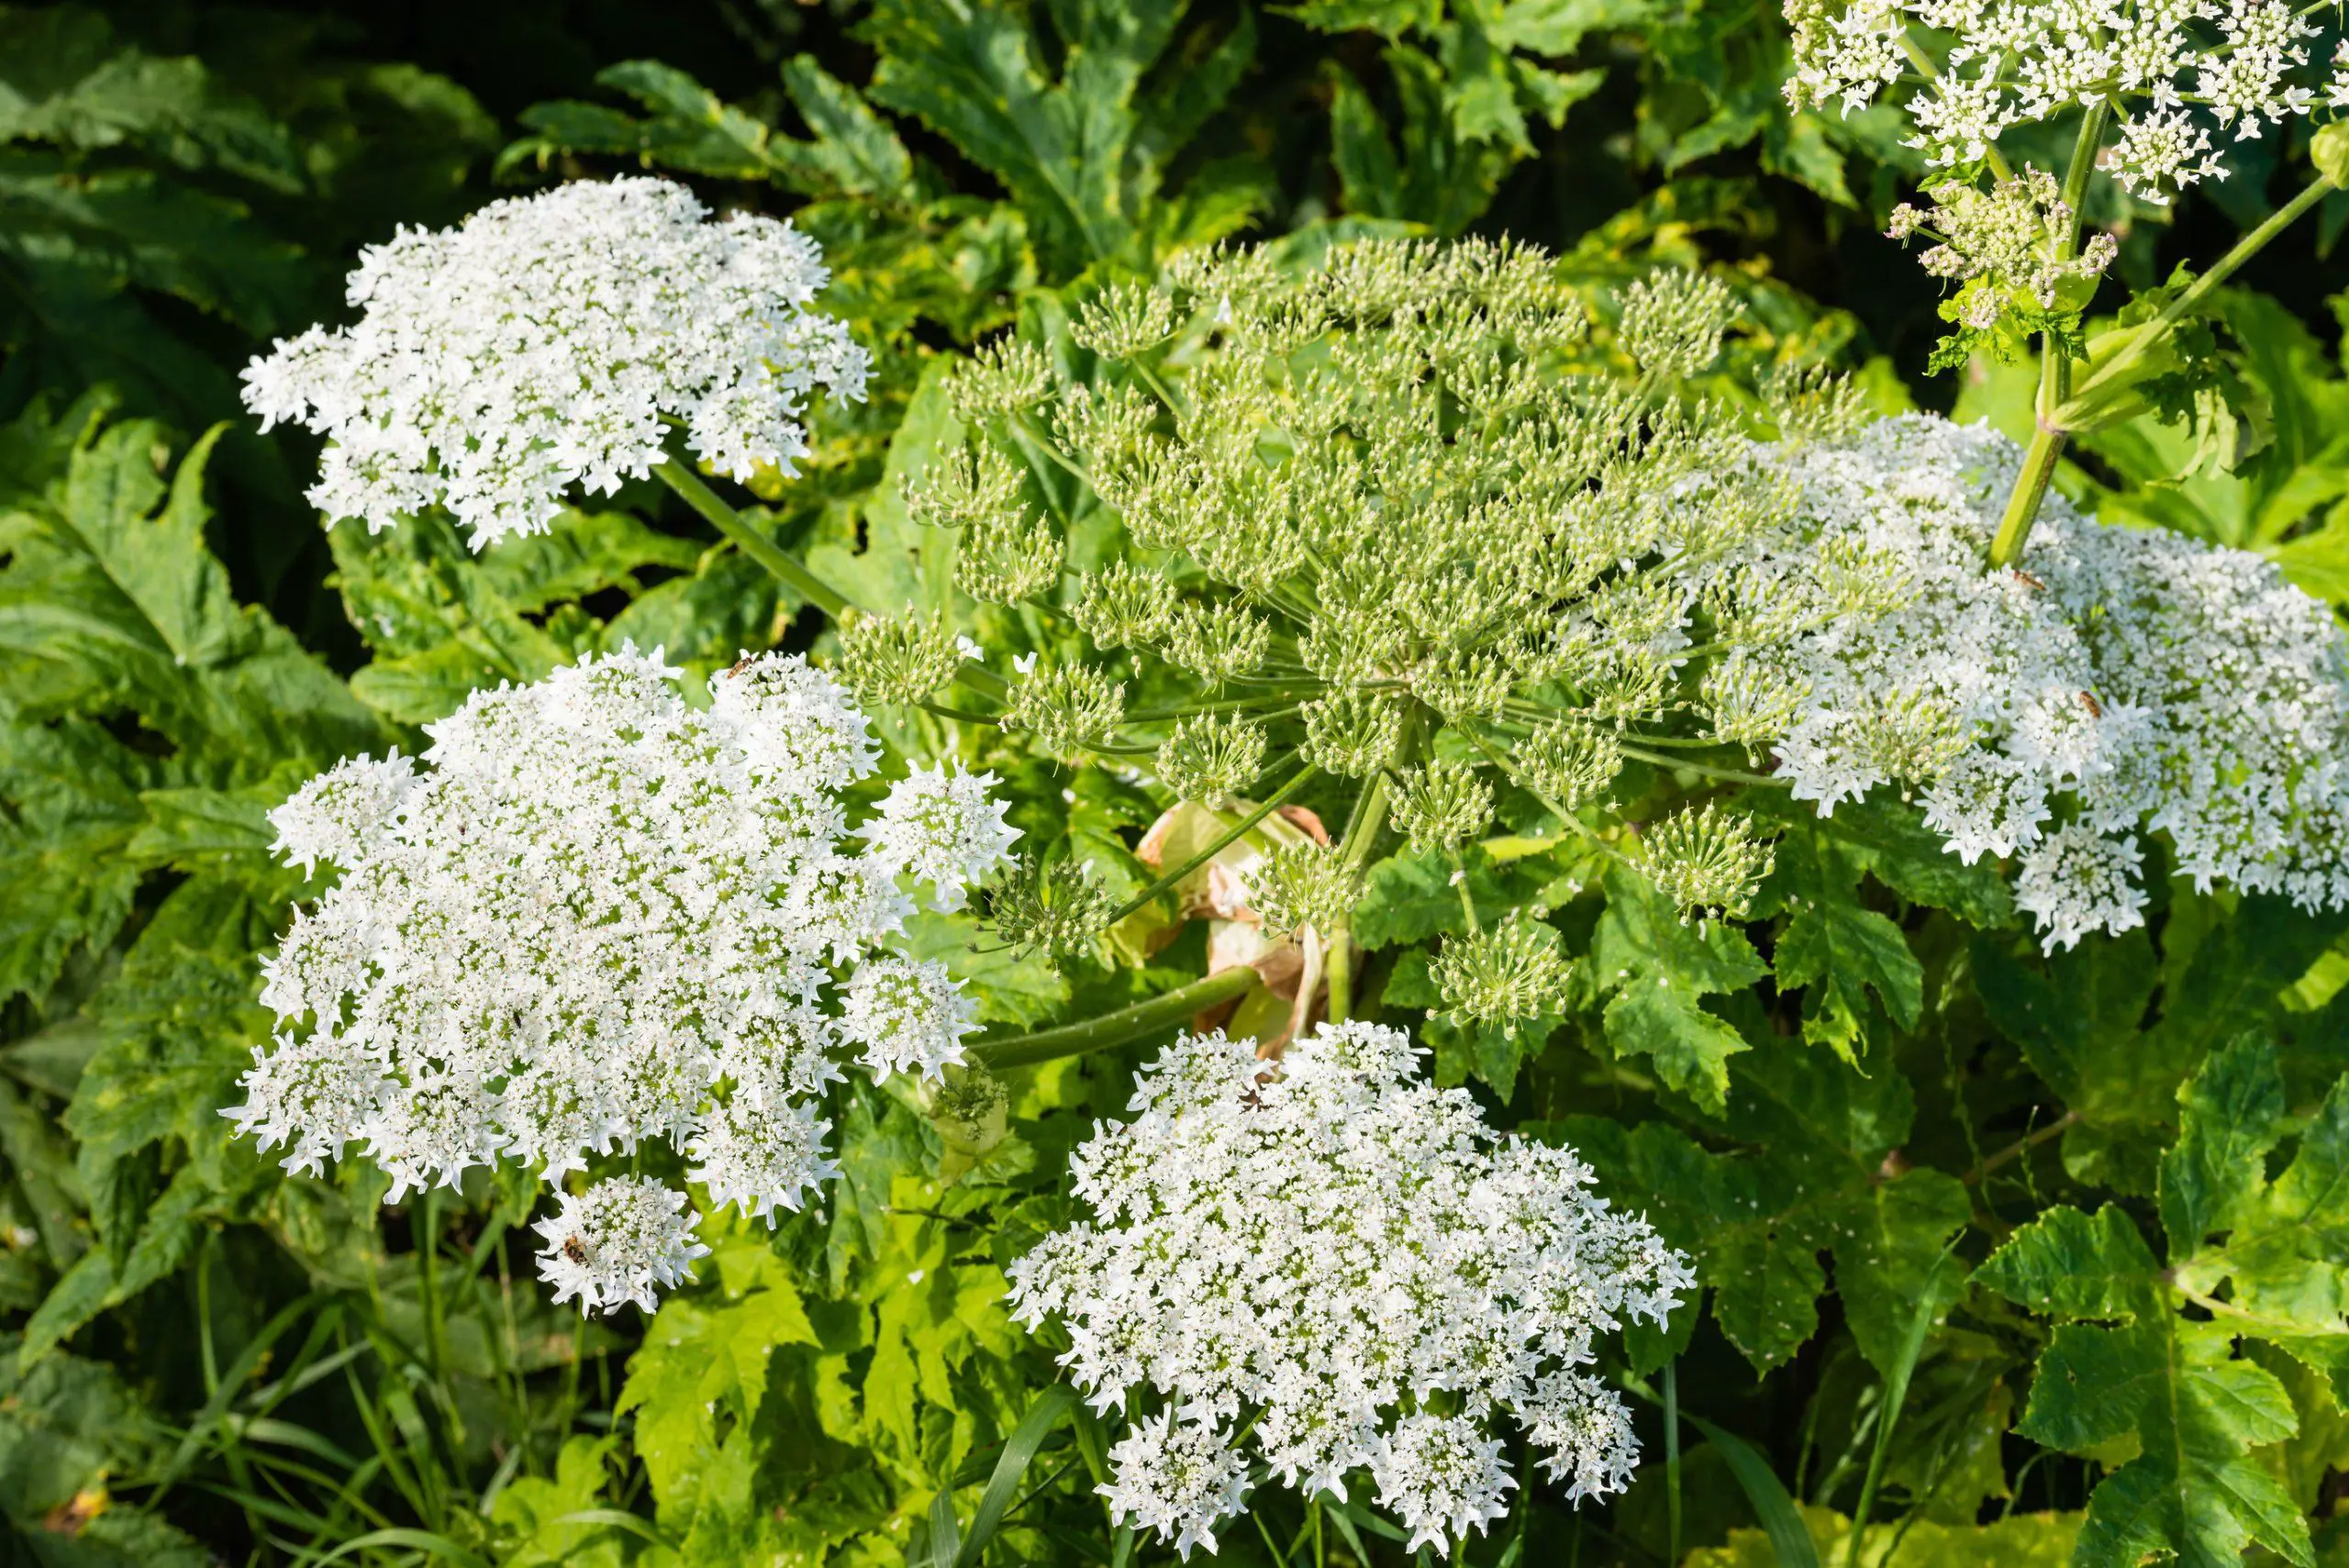 Closeup of a white blooming Giant Hogweed or Heracleum mantegazzianum plant and its seed heads